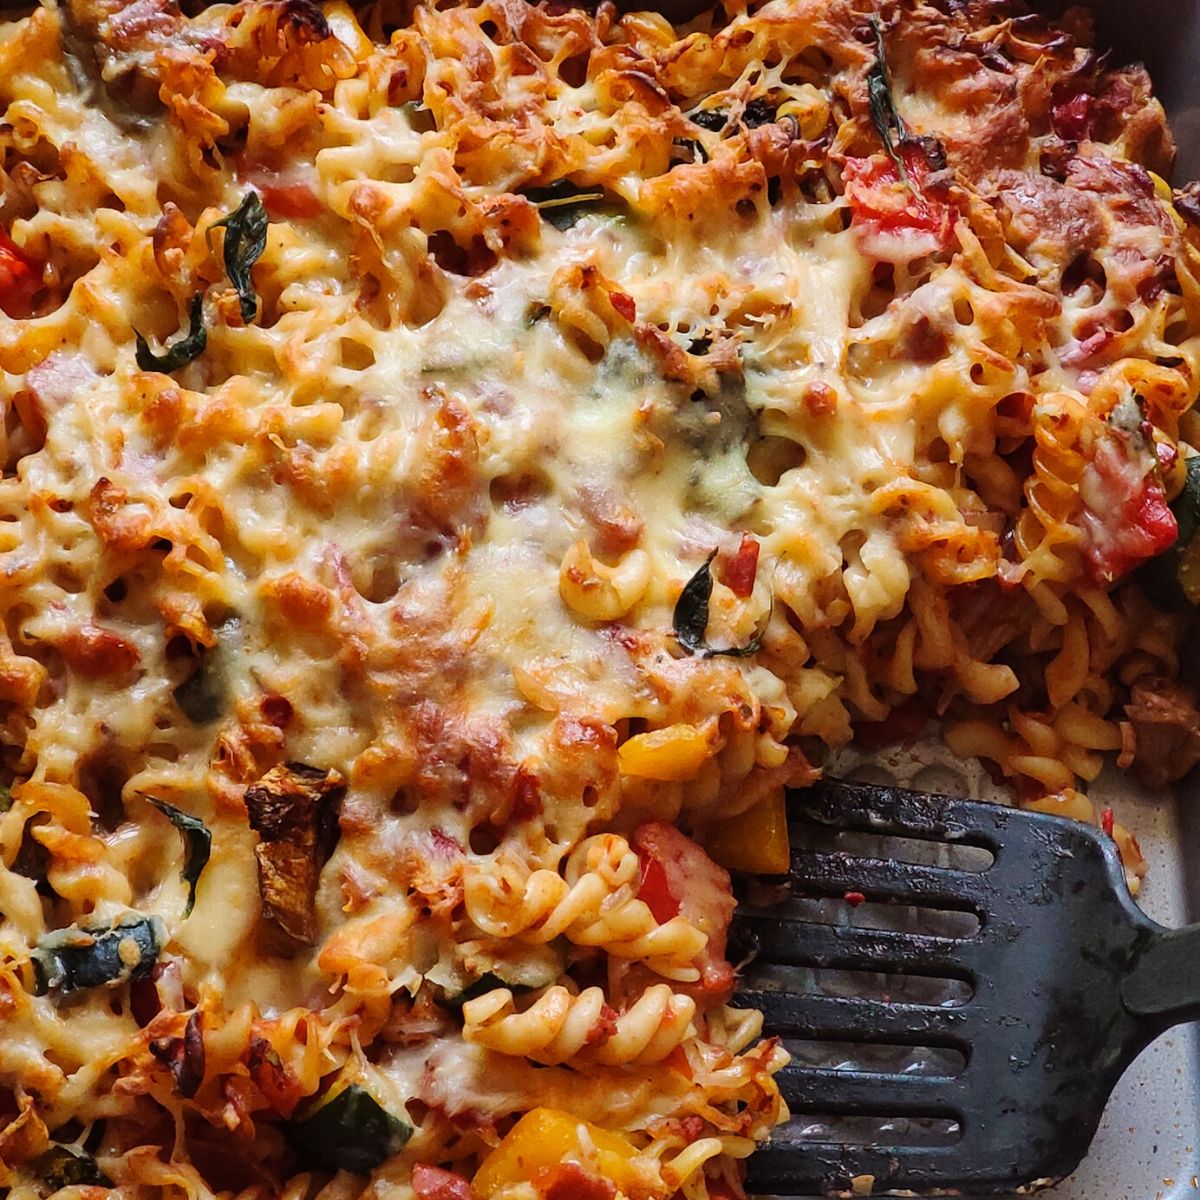 Vegetable baked pasta getting scooped out with a black spatula